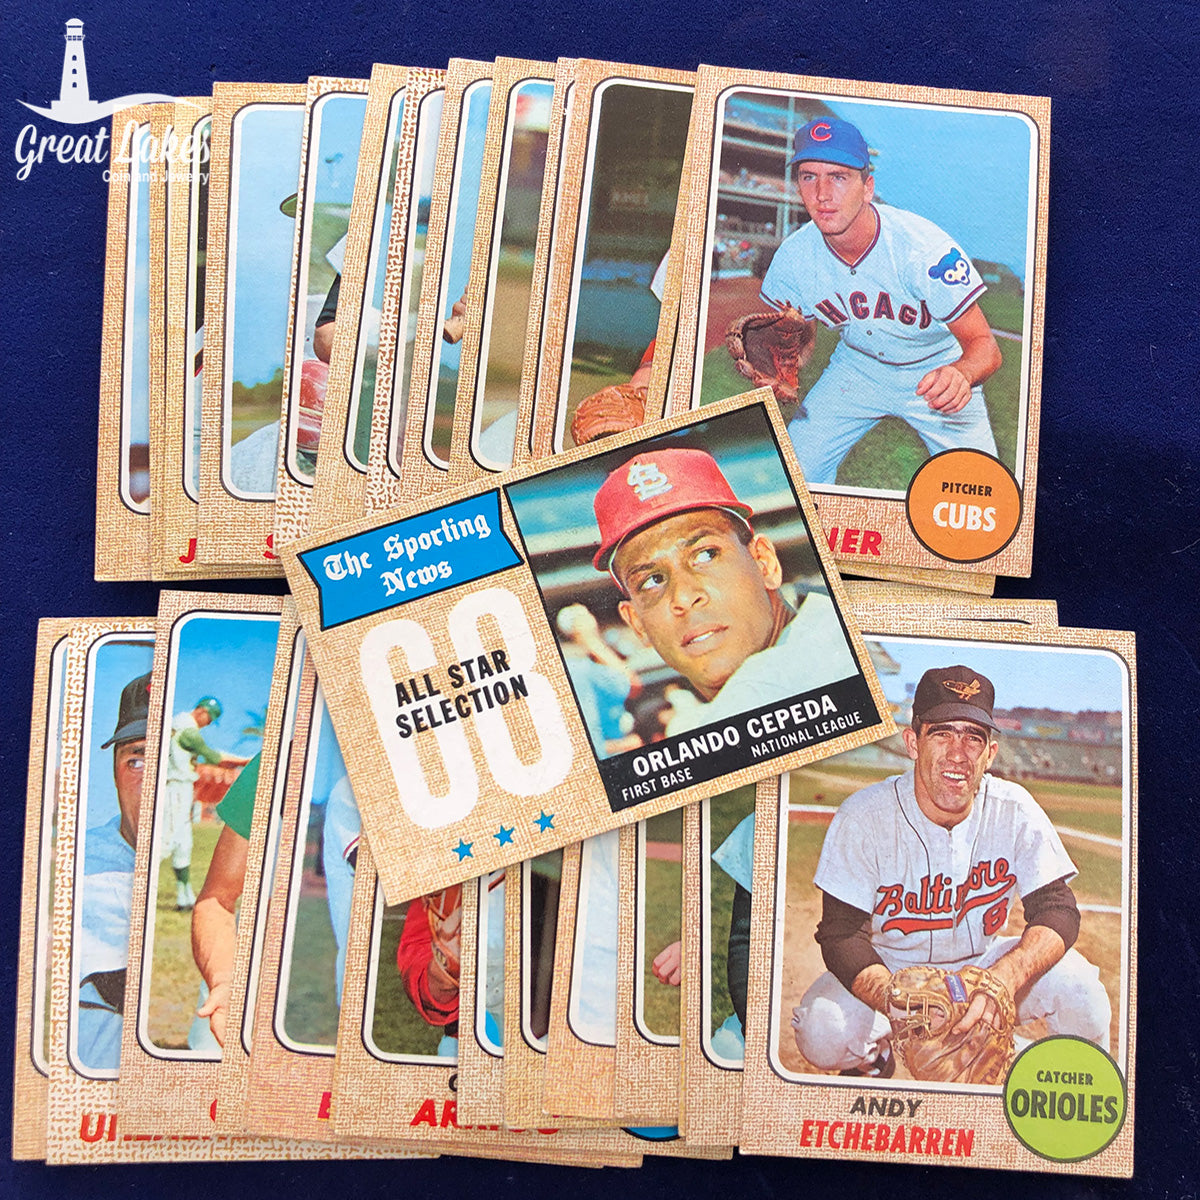 31 Piece Lot of 1968 Topps Baseball Cards